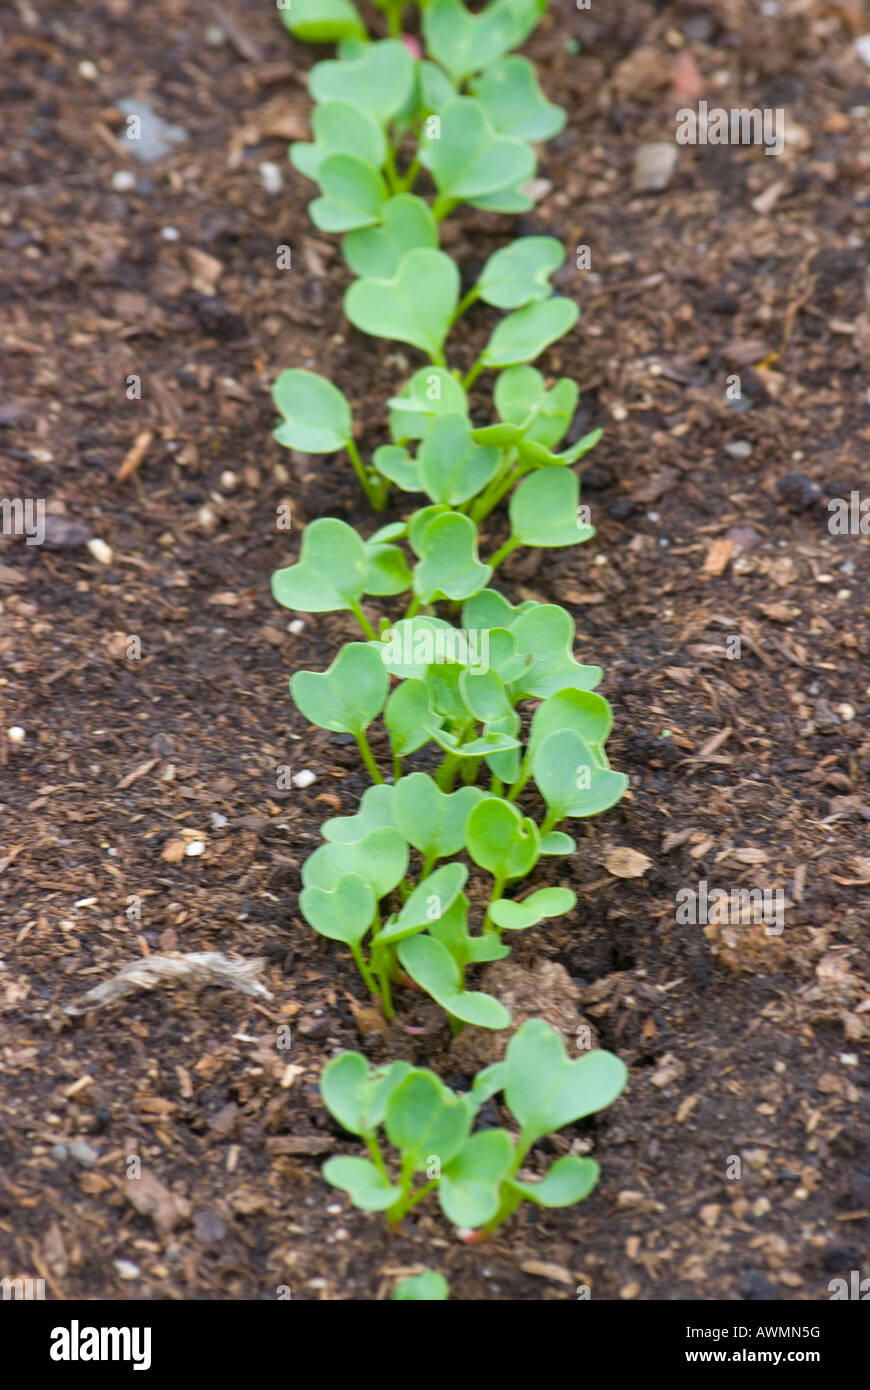 A row of young radish seedlings Stock Photo